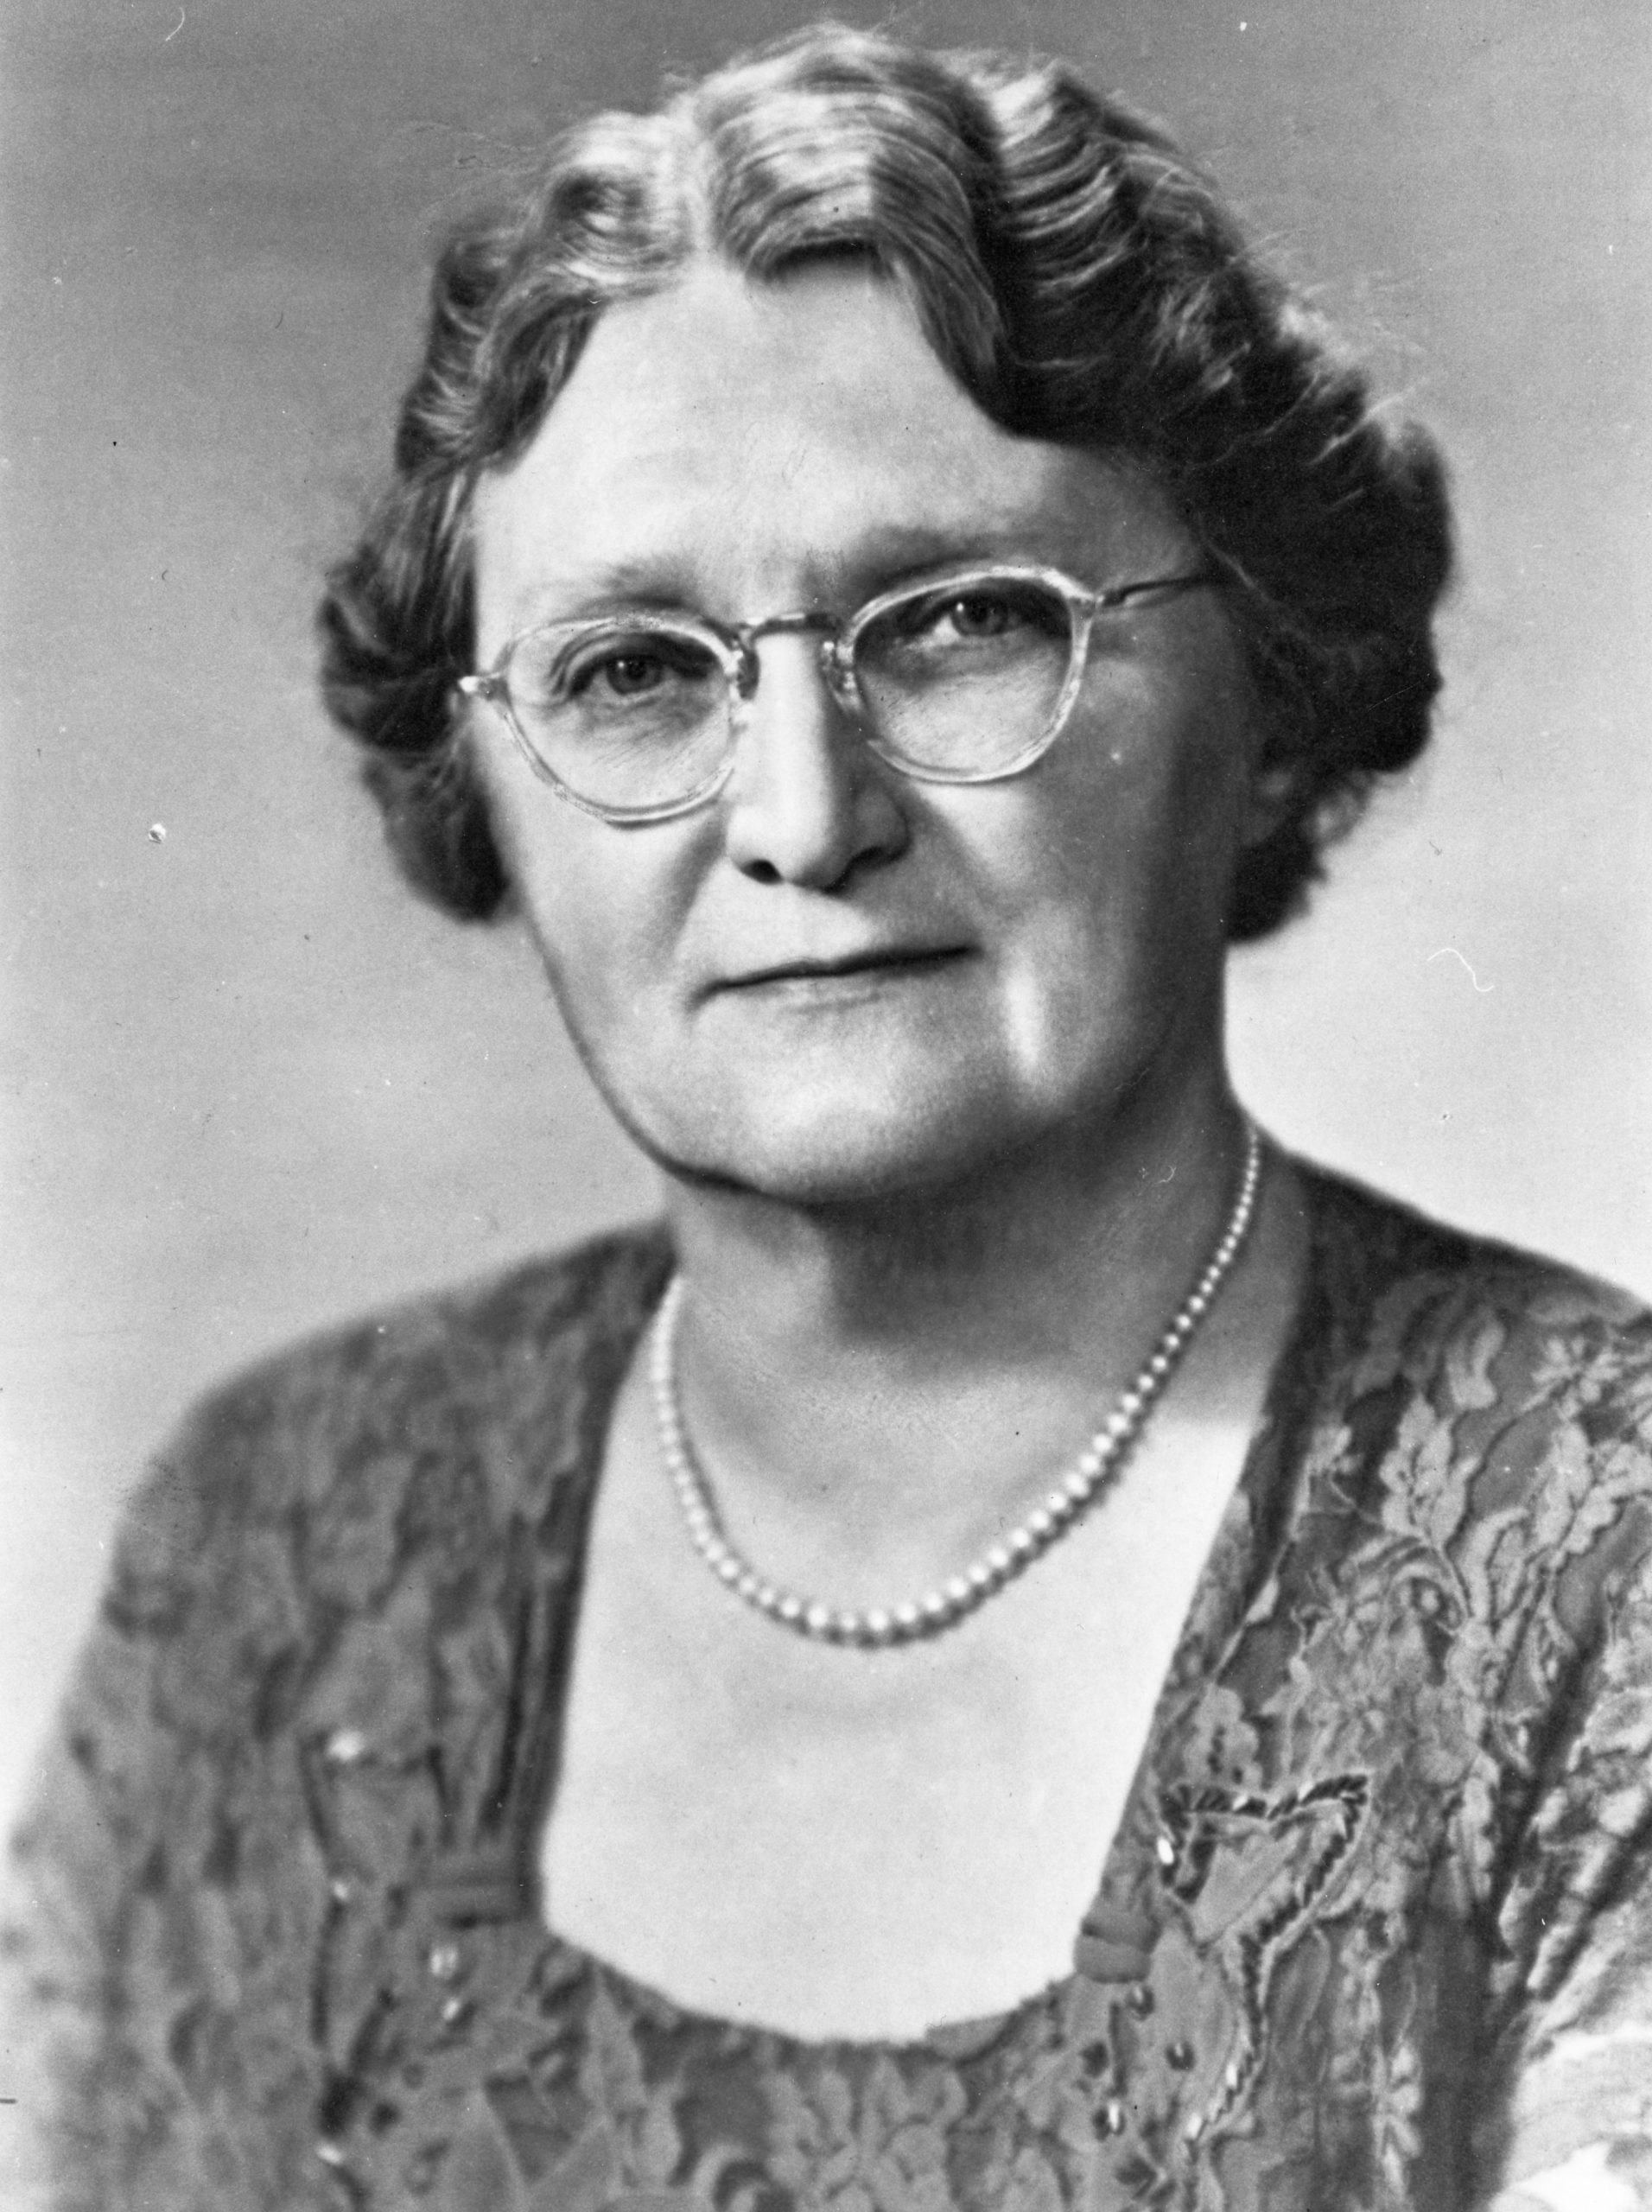 A black and white portrait of an elegantly dressed woman, wearing glasses.